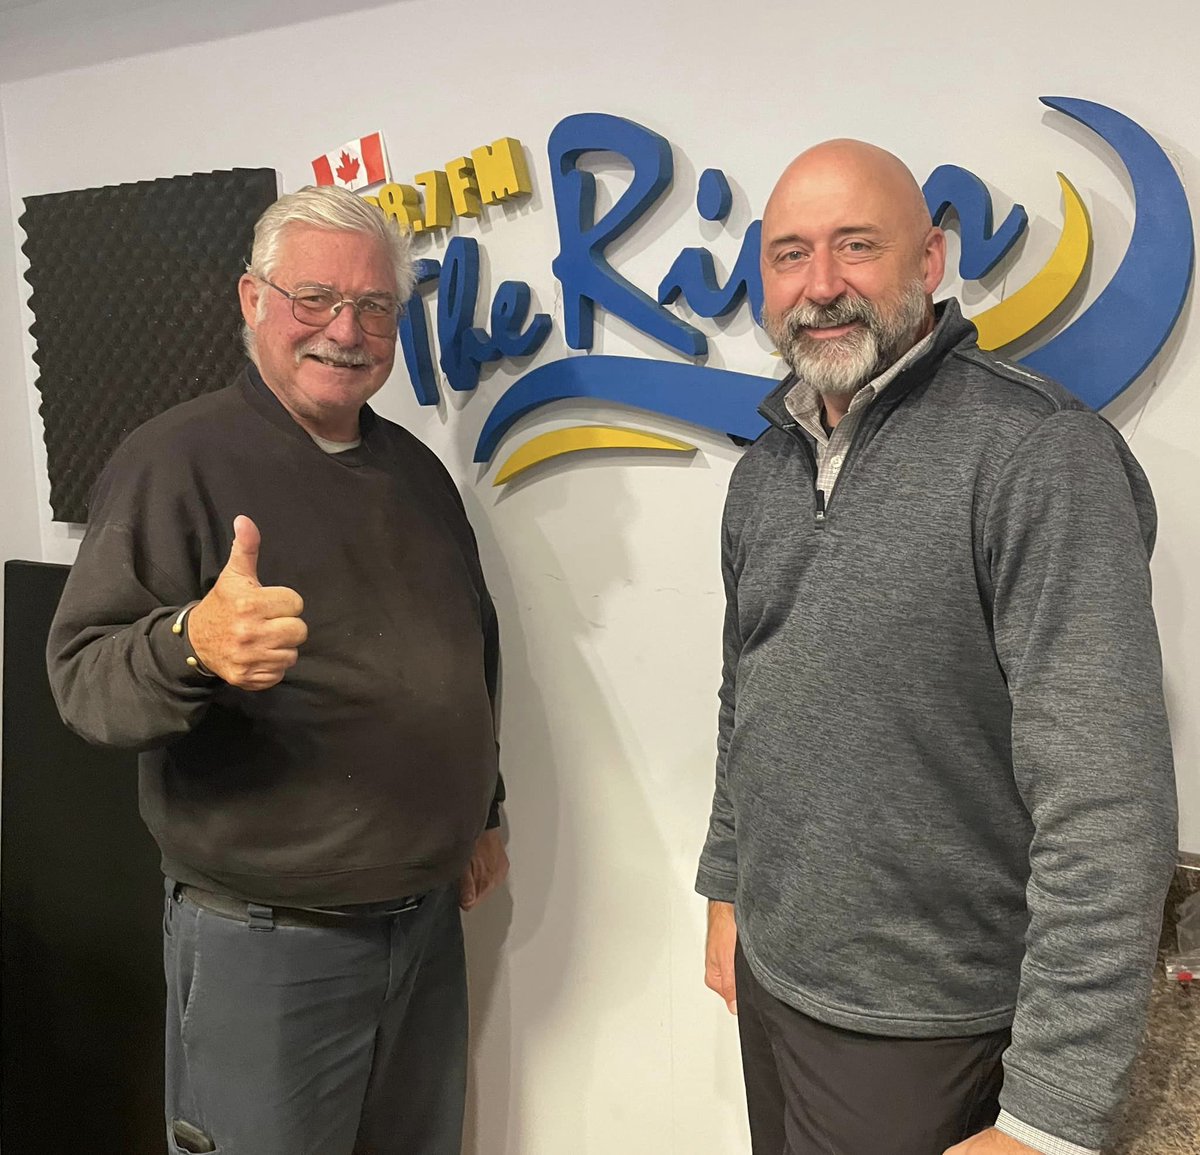 Always an interesting chat with Murray Calder on @887theriver's 'Town Hall.' Talked about Axing the Liberal Carbon Tax, @BenLobbMP's bill in support of farmers, foreign interference, the @RCAF_ARC's 100th & more. Listen here: 887theriver.ca/wp-content/upl… & 887theriver.ca/wp-content/upl…